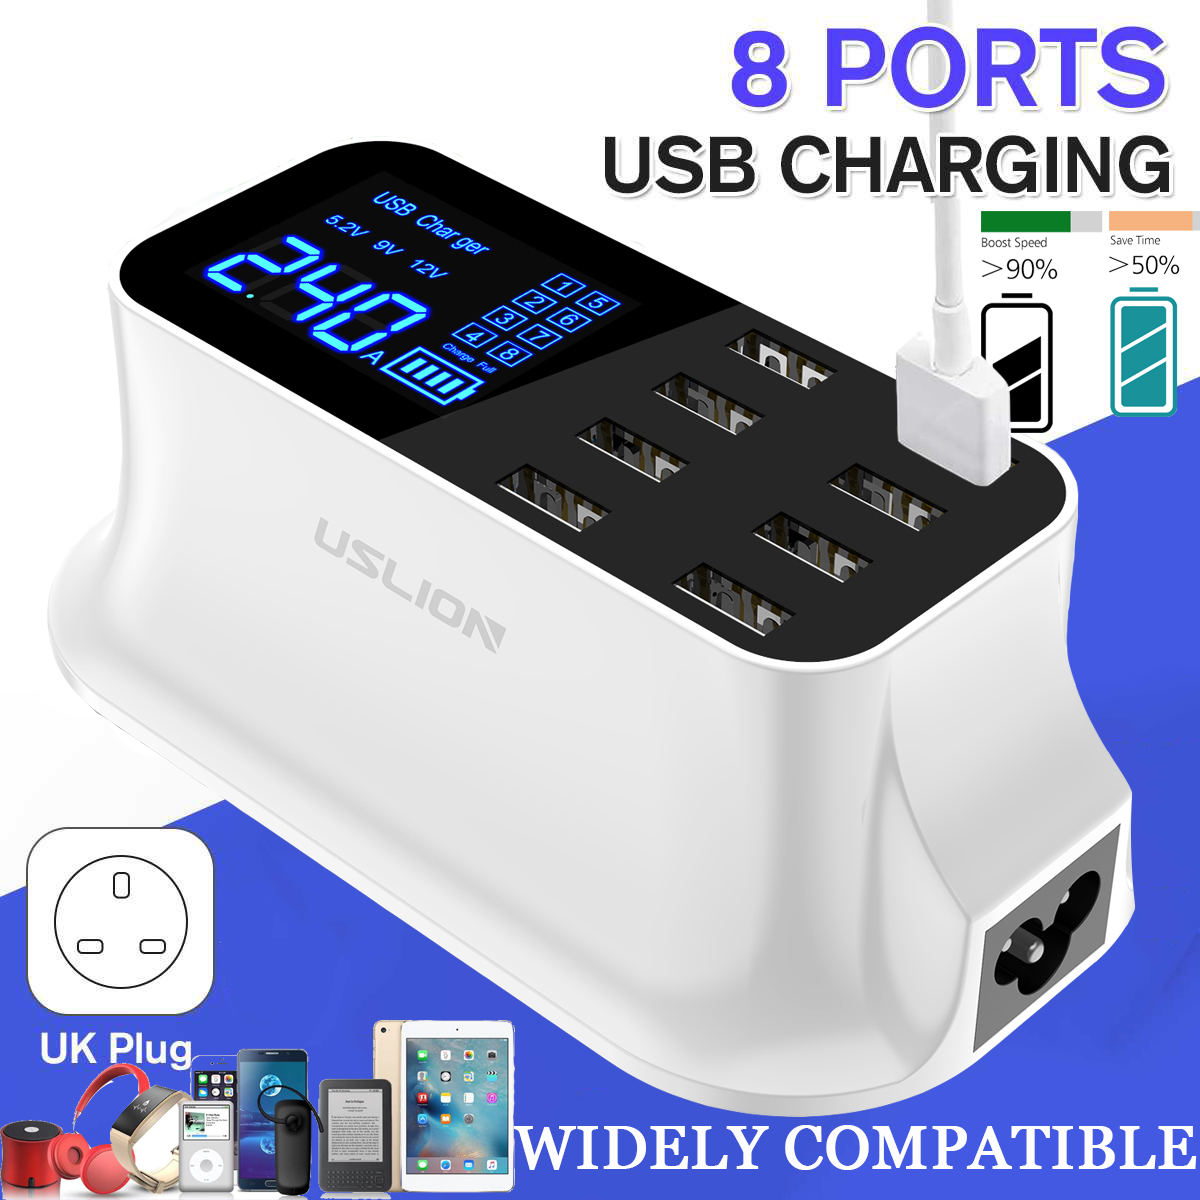 can i use the same usb charger for mac and android